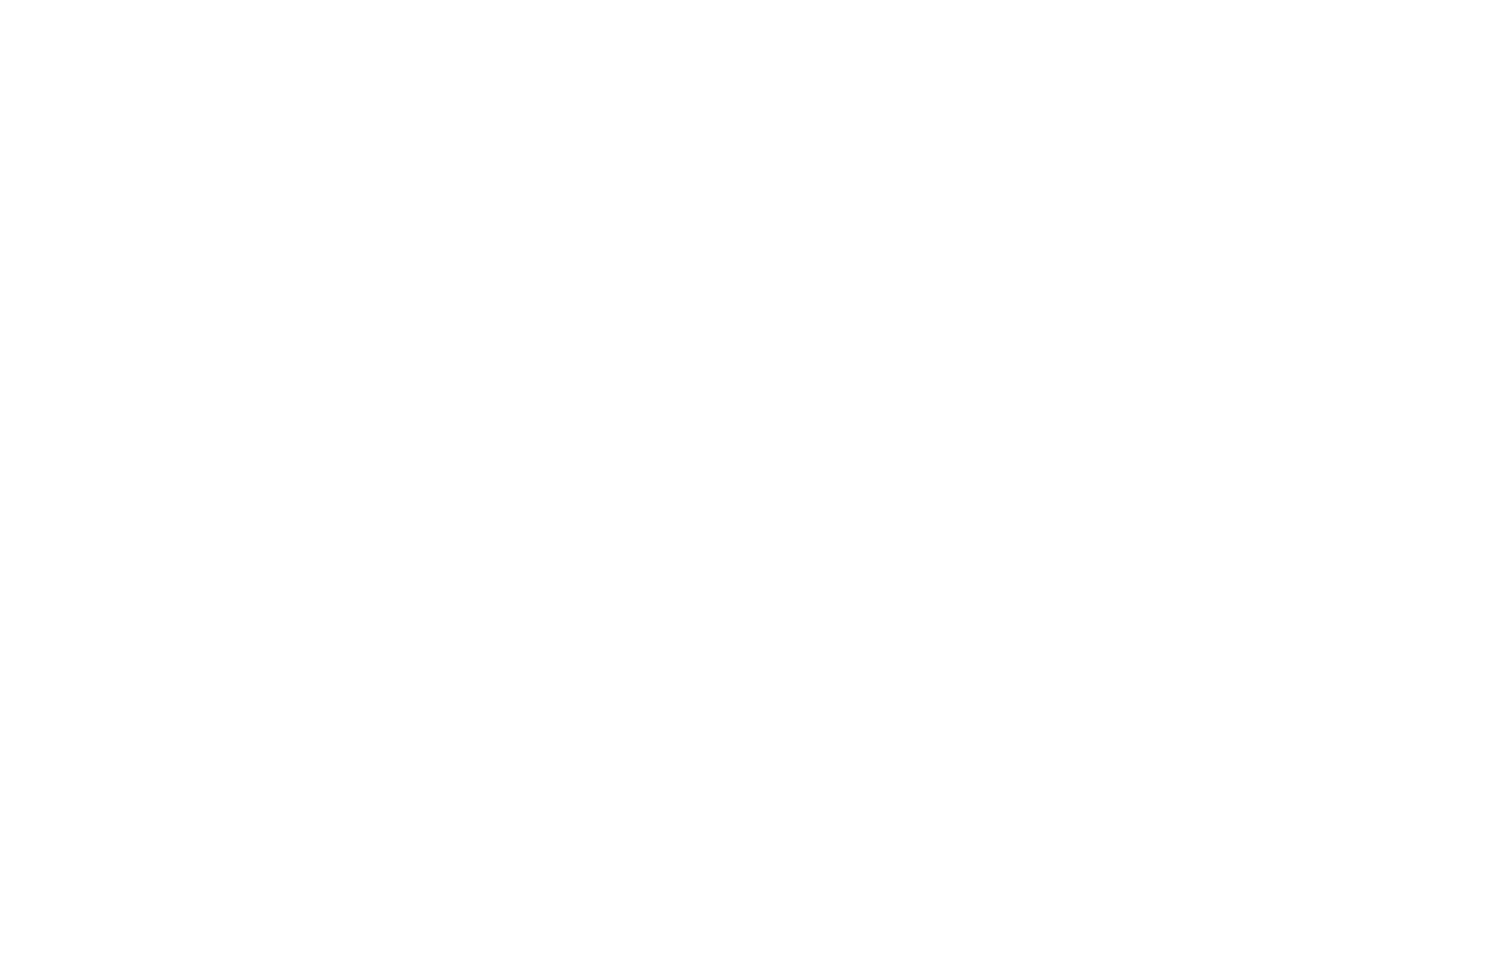 The Samantha Russell Band